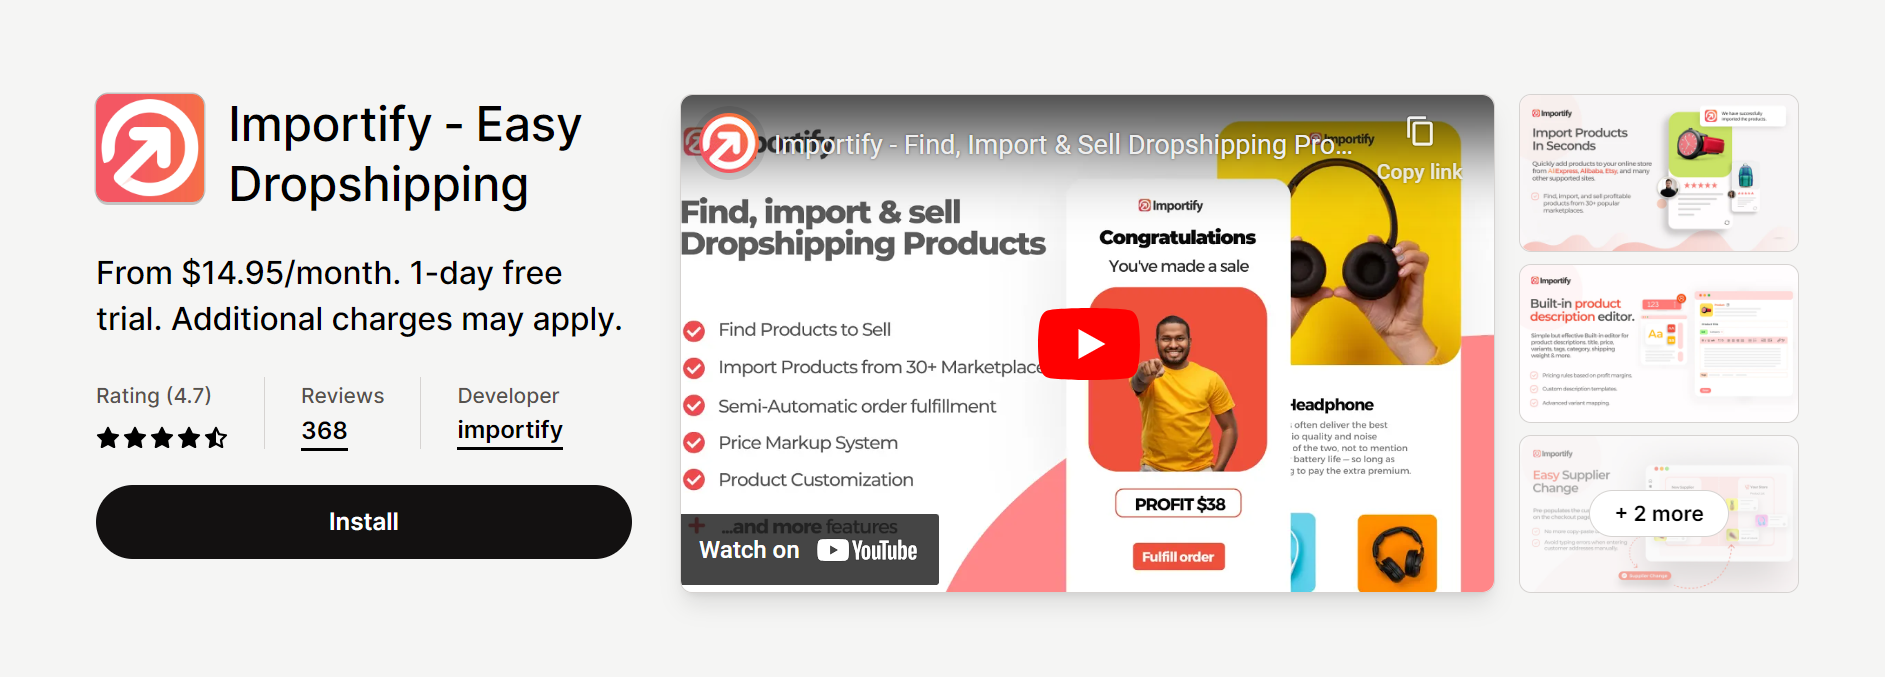 Importify